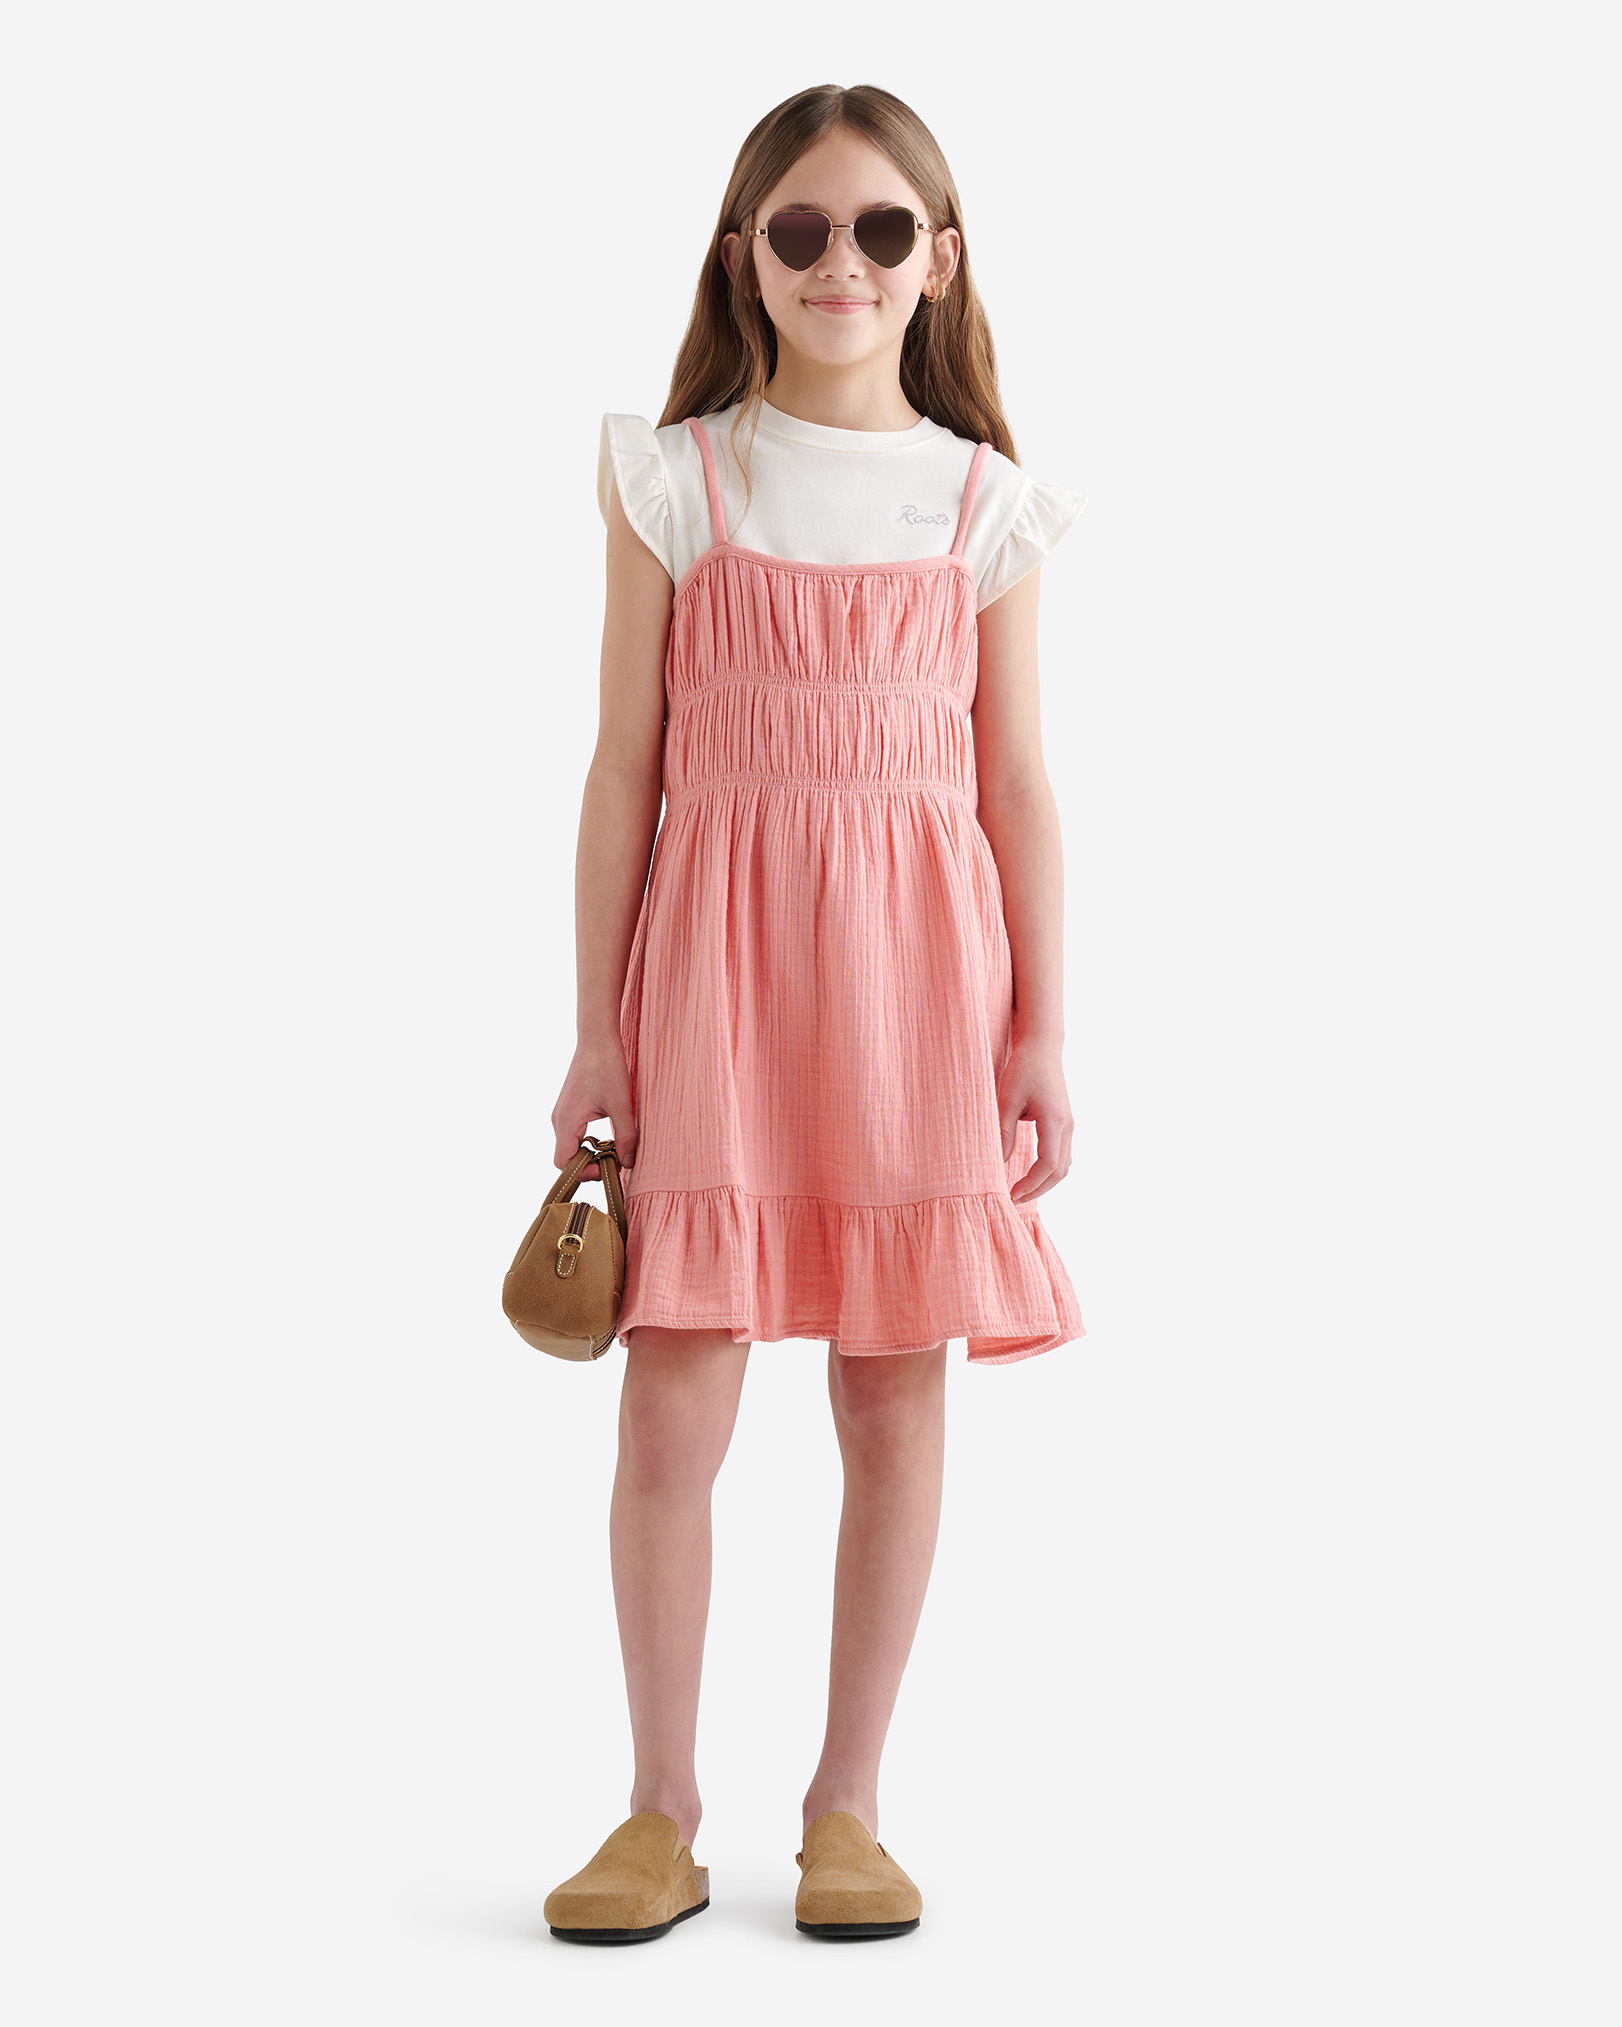 Roots Girl's Crinkle Tiered Dress in Mauveglow